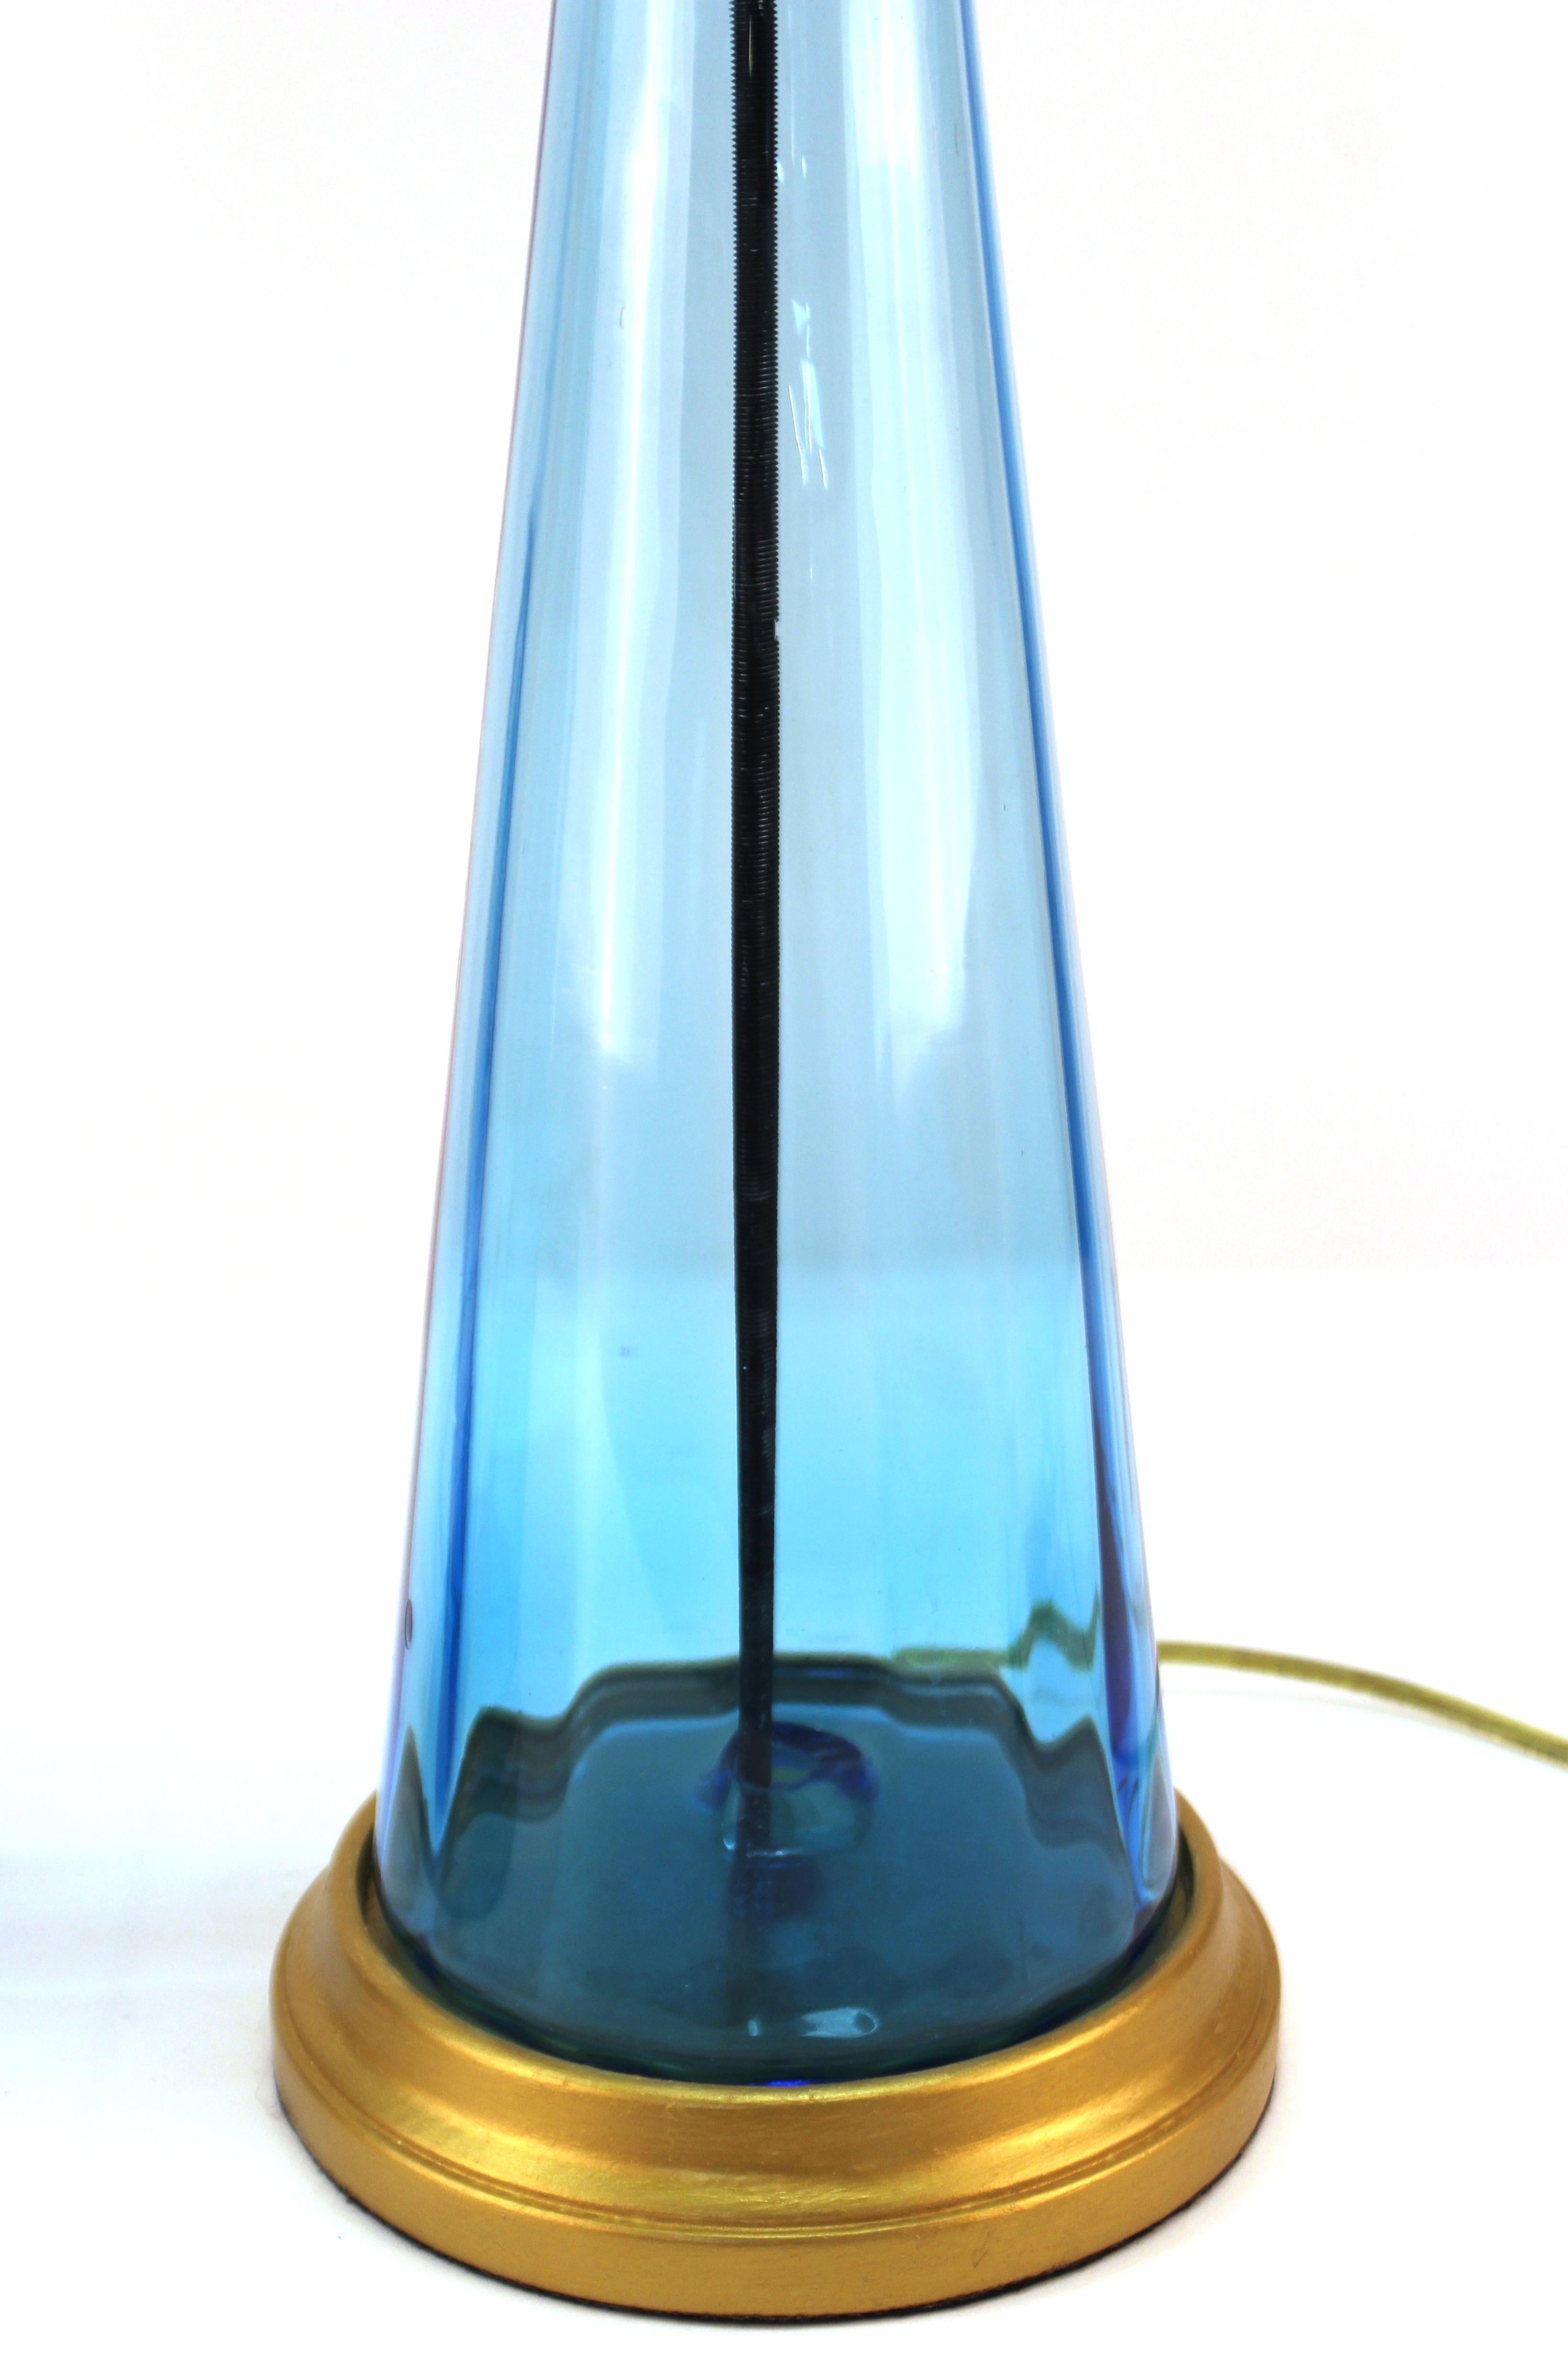 Mid-Century Modern pair of table lamps with a clear blue glass body atop a round giltwood base. The pair was likely made in the mid-20th century and is in great vintage condition.